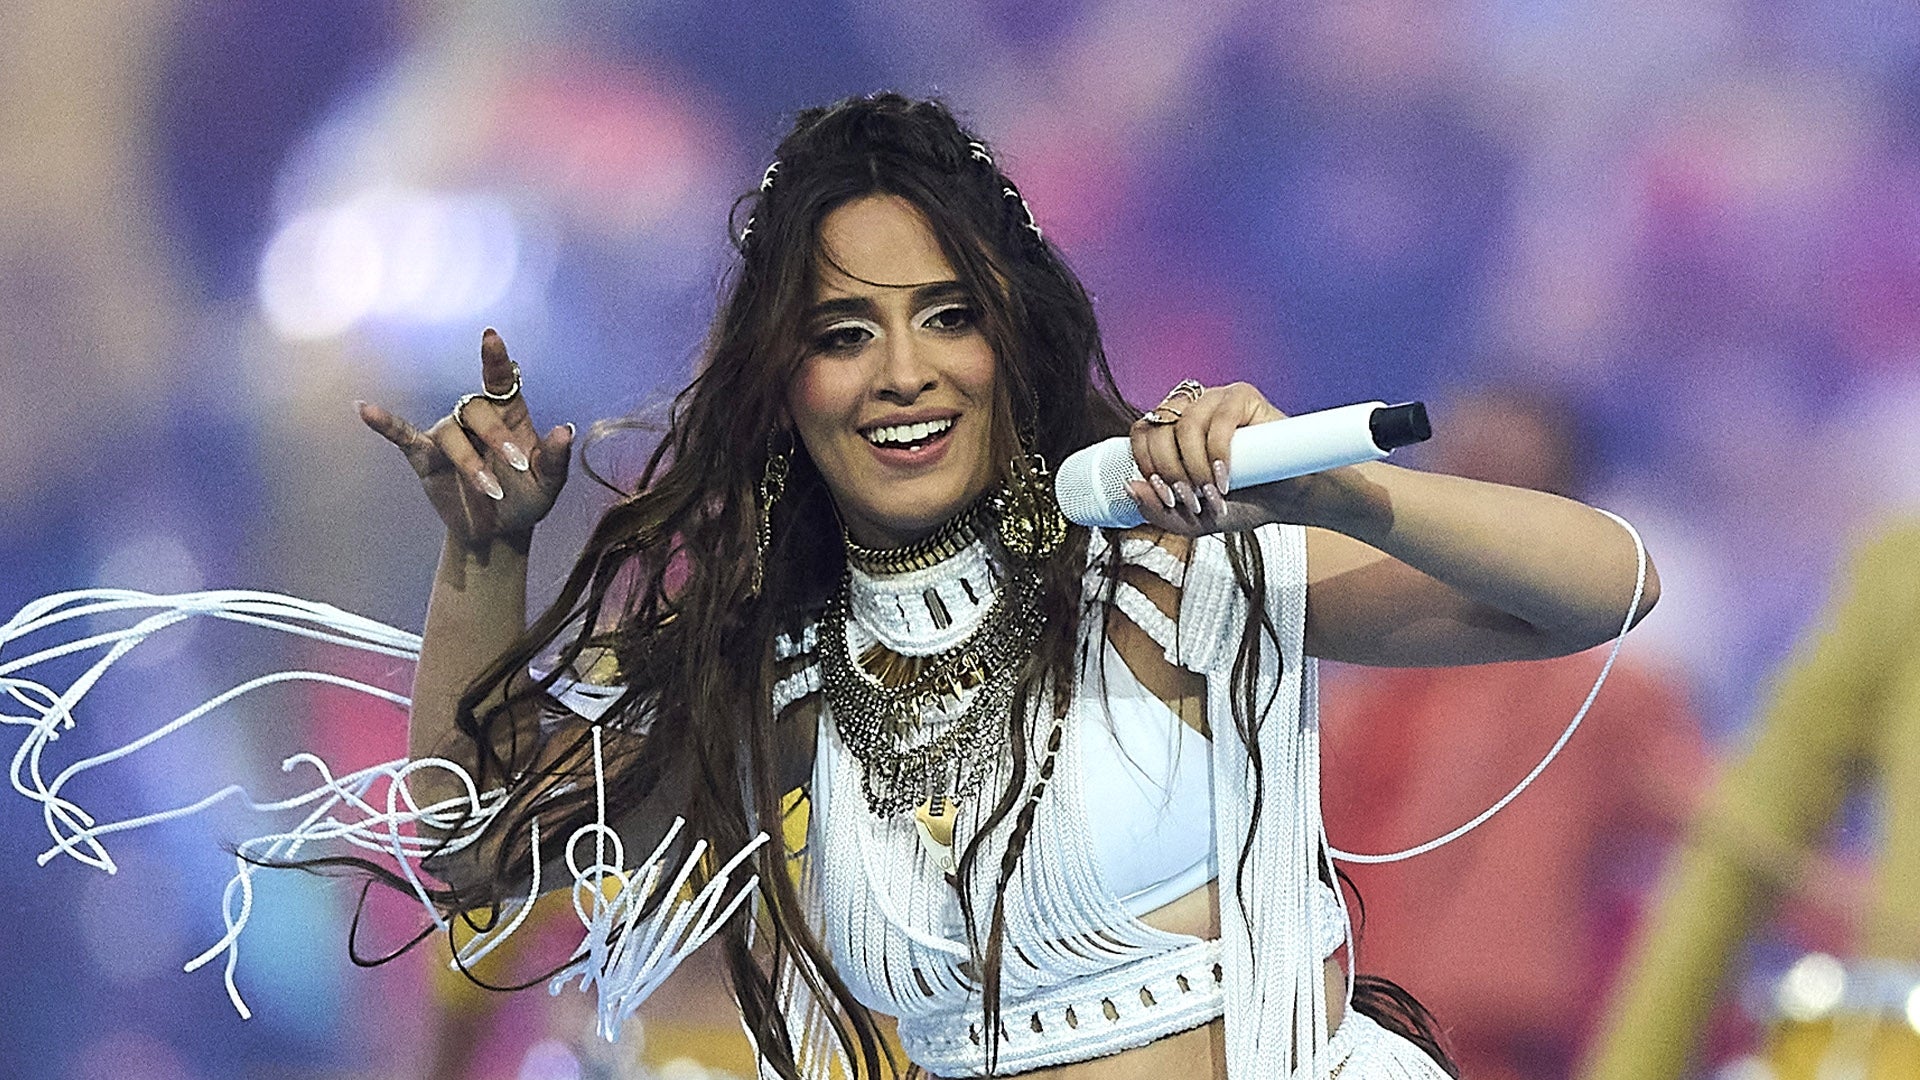 Camila Cabello Claps Back at ‘Rude’ Fans Following Her Champions League Final Performance